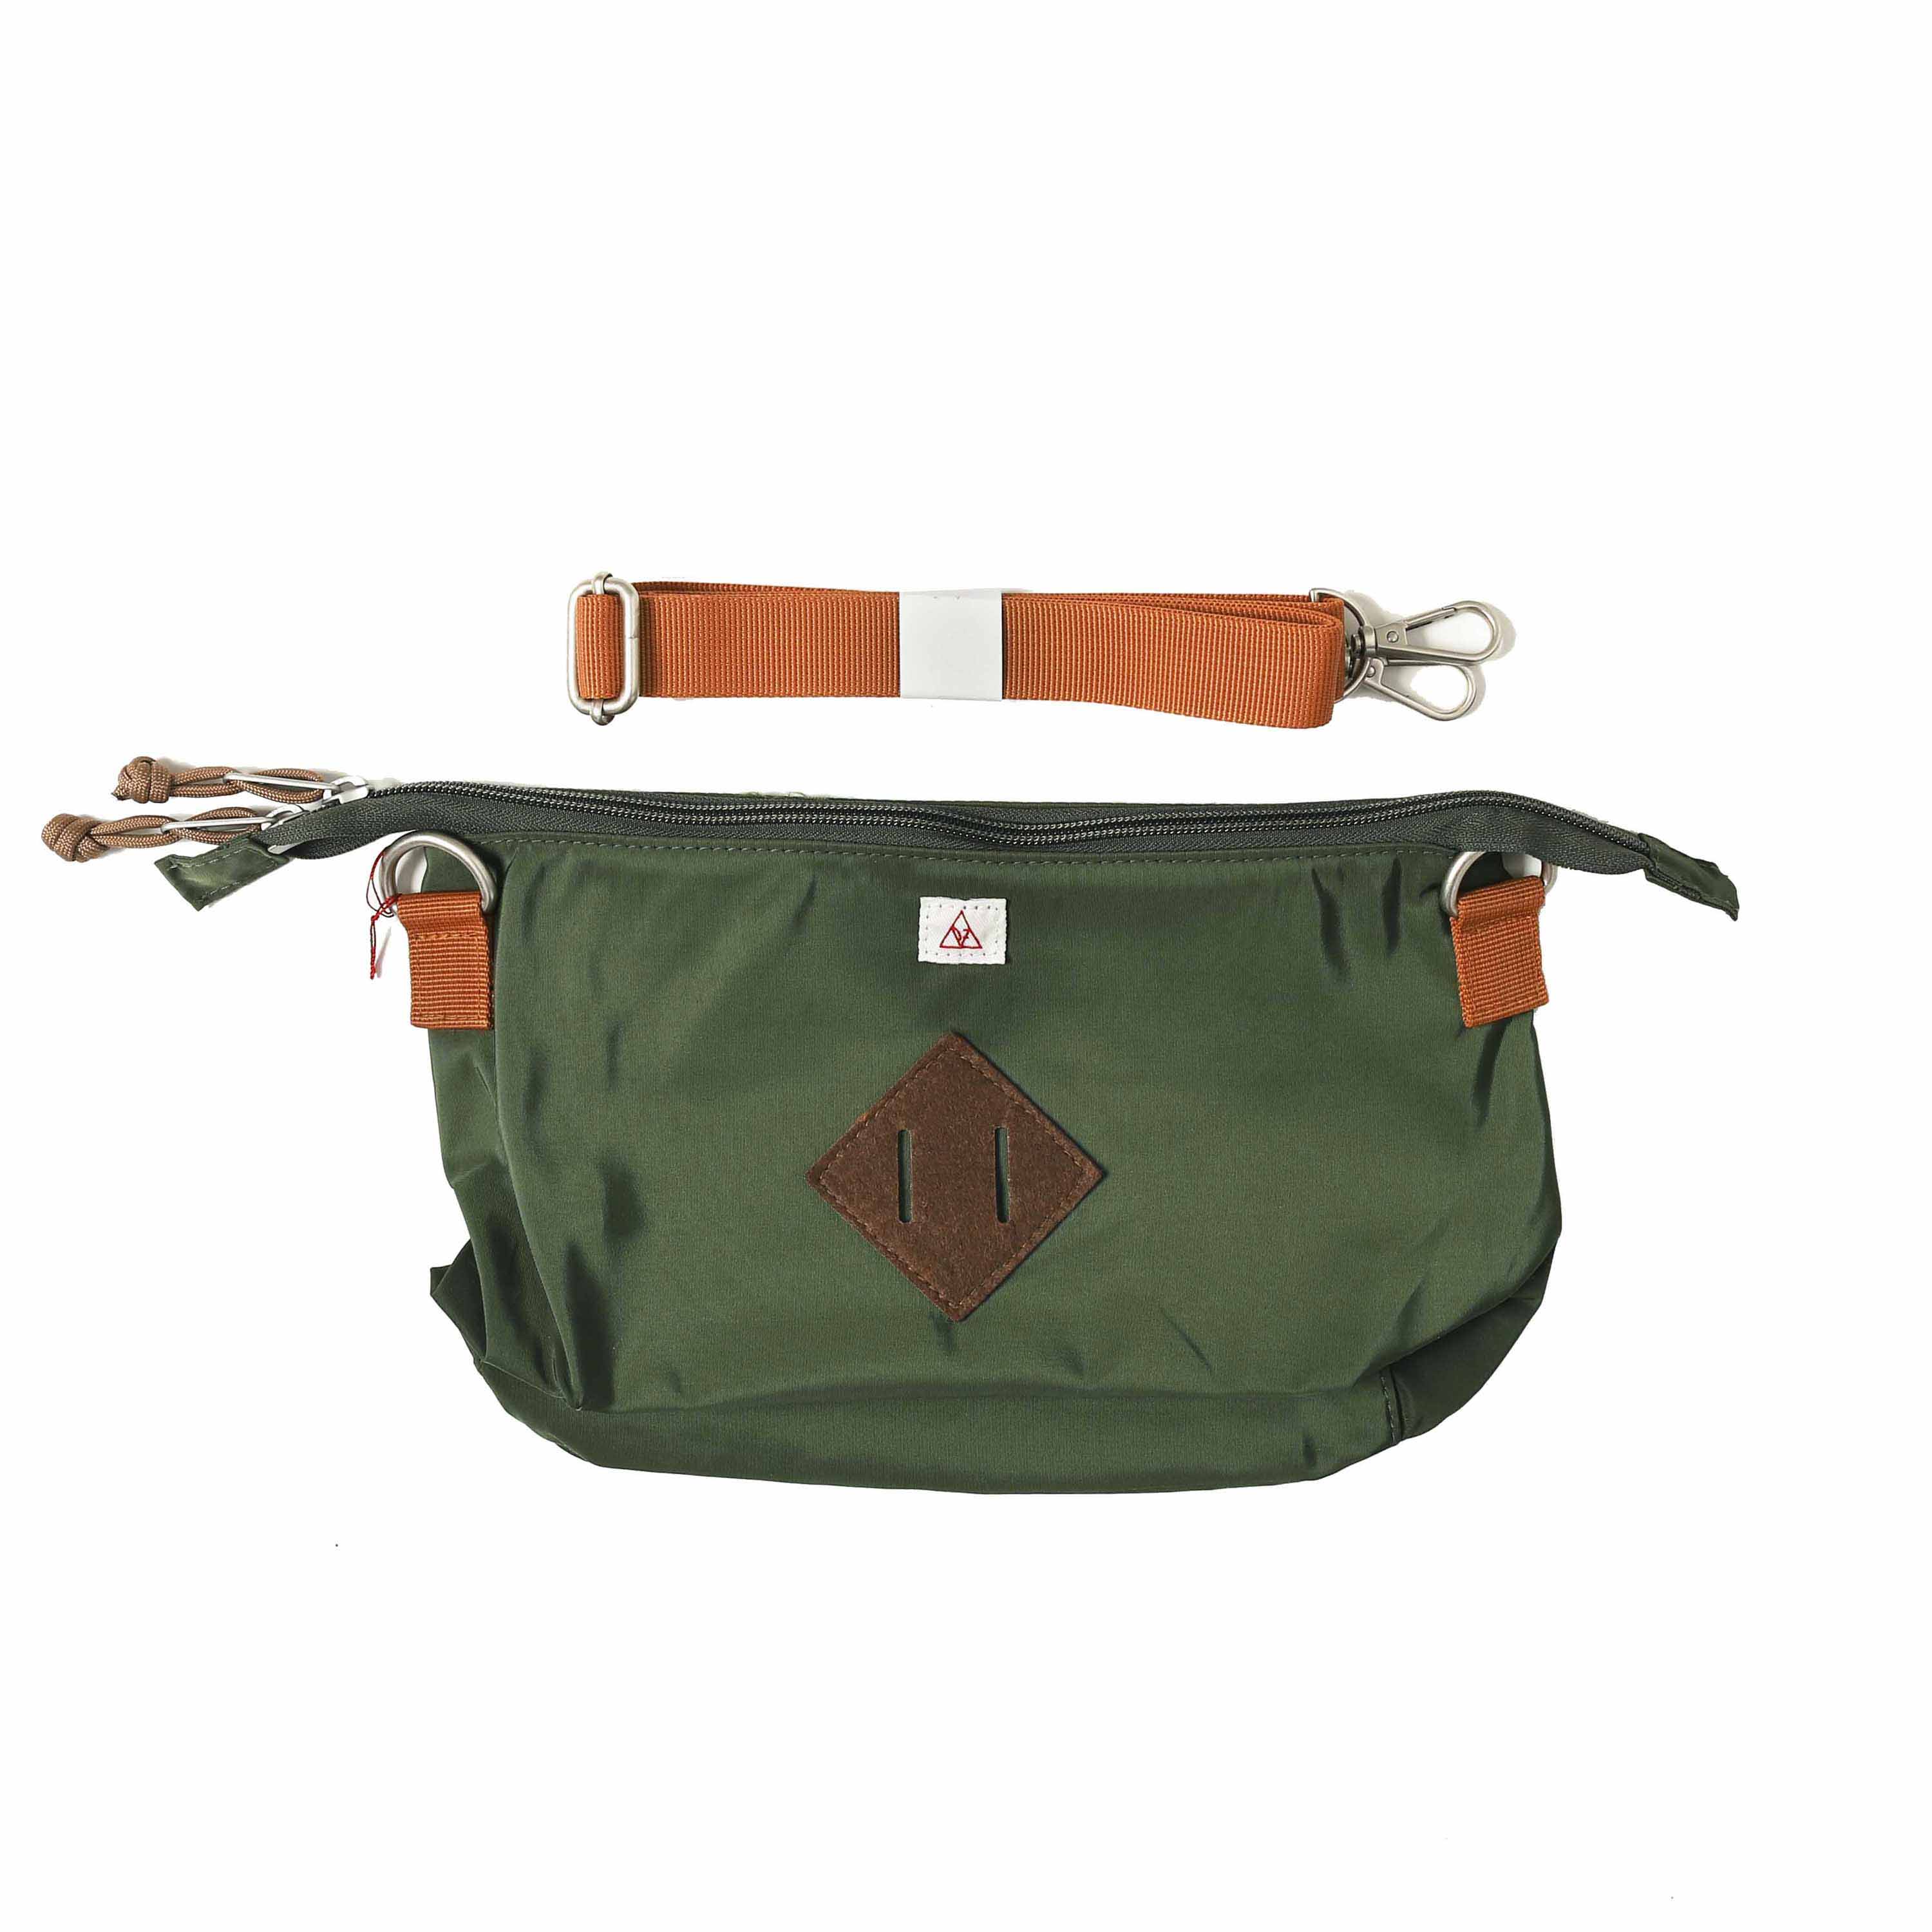 FANNY PACK - OLIVE DRAB